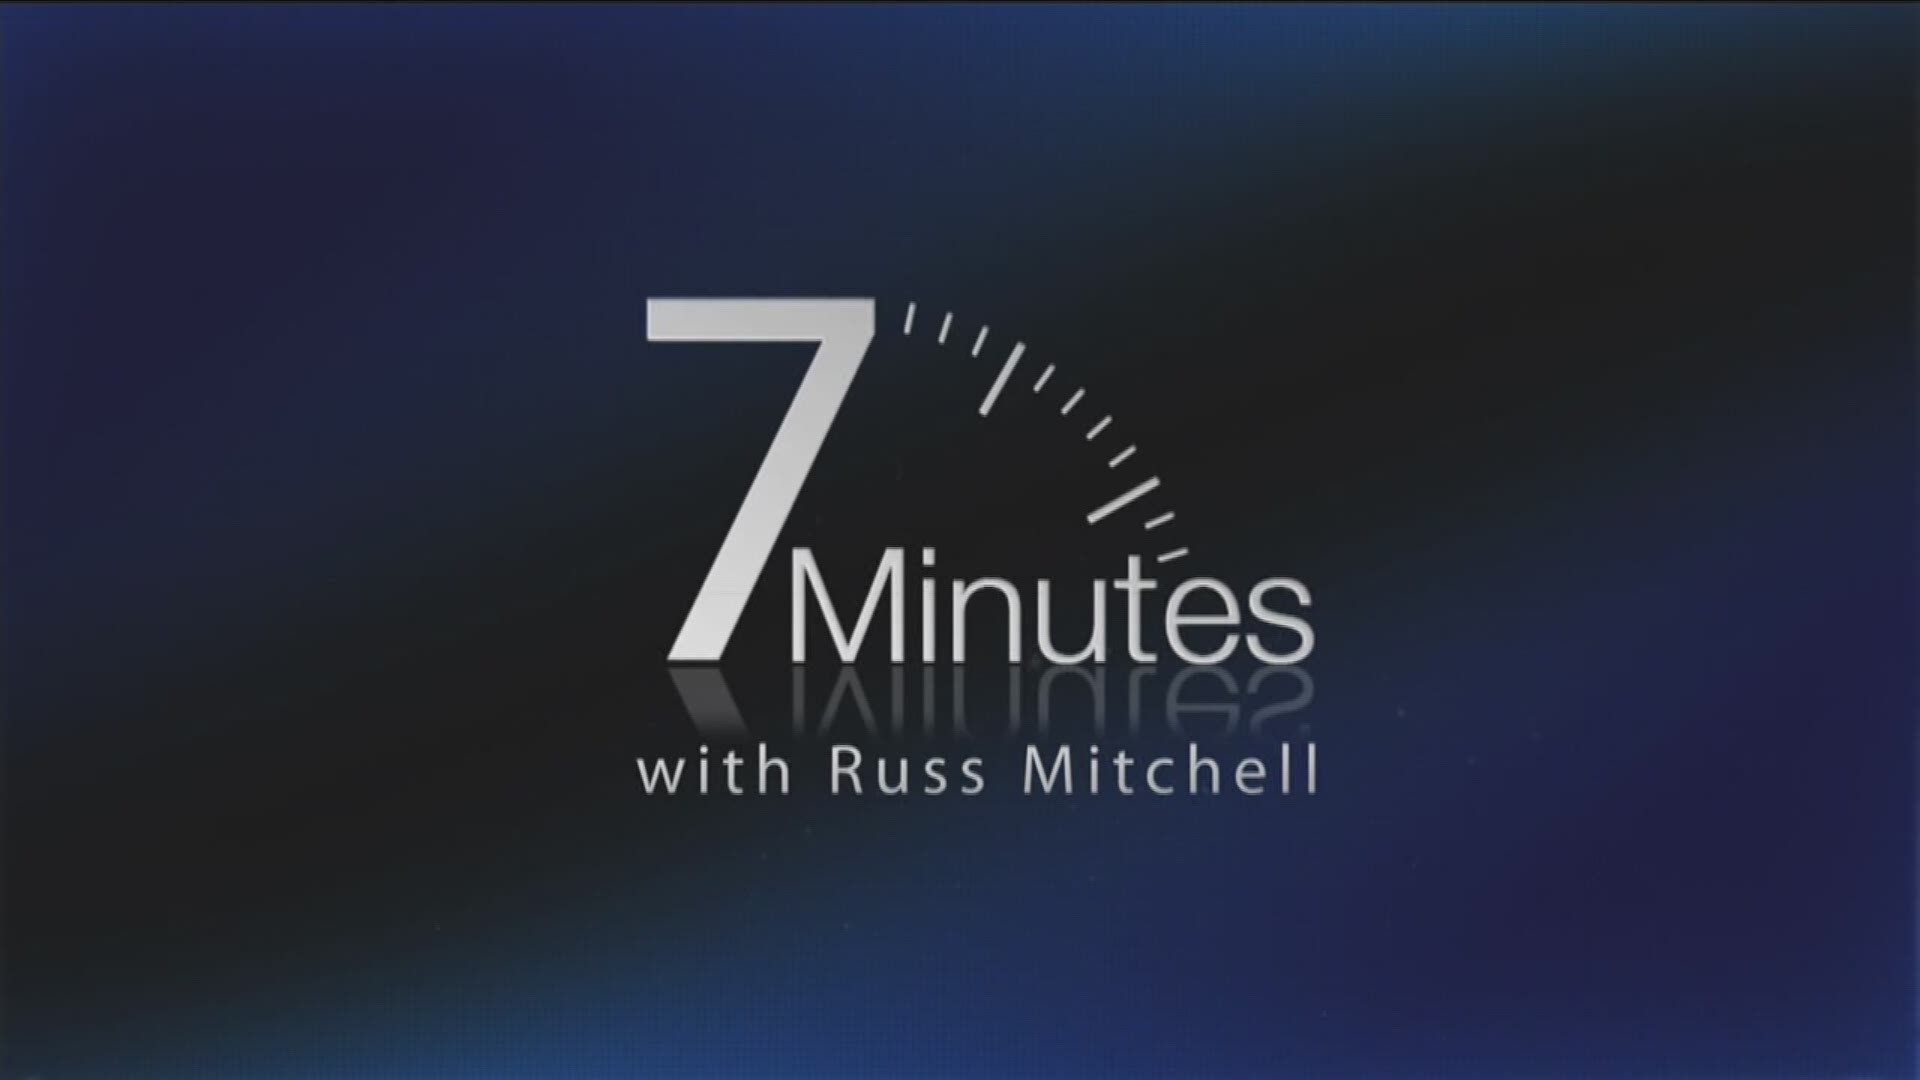 7 Minutes with Russ Mitchell this Sunday has him talking with legendary Cleveland Orchestra conductor Franz Welser-Most. NOTE: Welser-Most's contract runs through 2022.